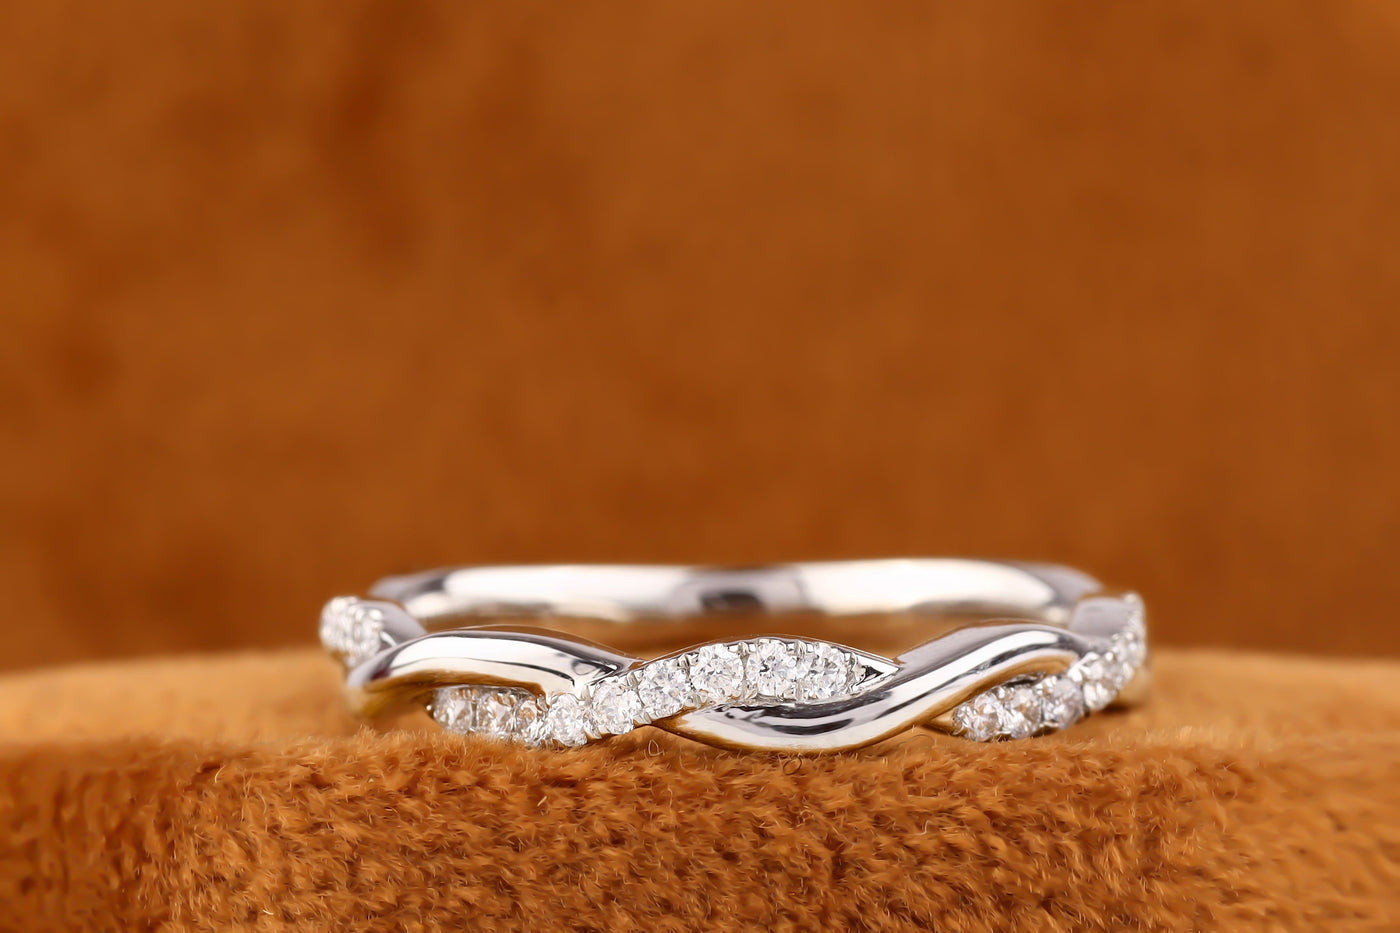 Infinity Moissanite Wedding Band, Round Cut Band, 14K White Gold Band, Twisted Shank Half Eternity Band, Matching Band For Engagement Ring